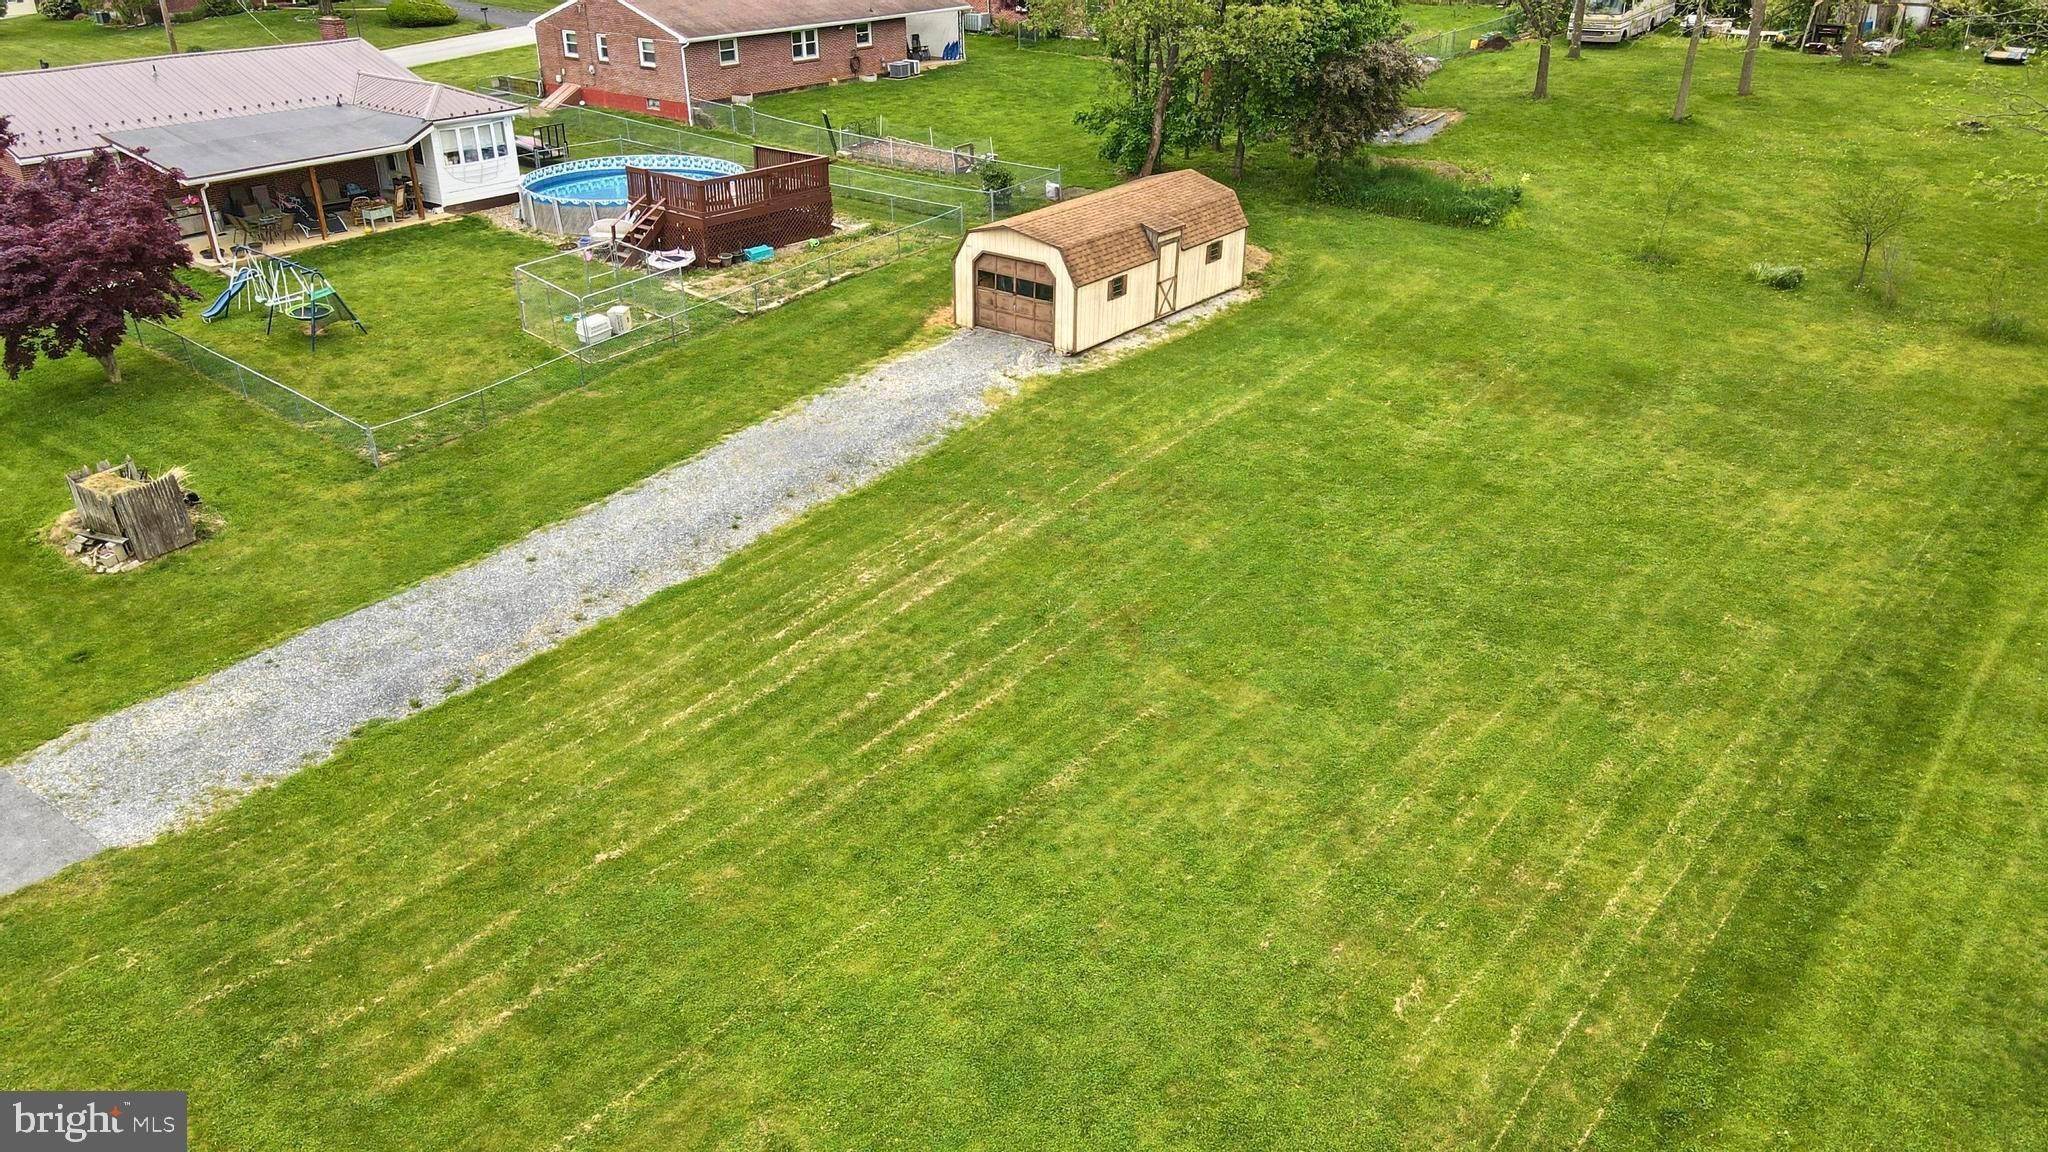 11. Land for Sale at Fayetteville, PA 17222